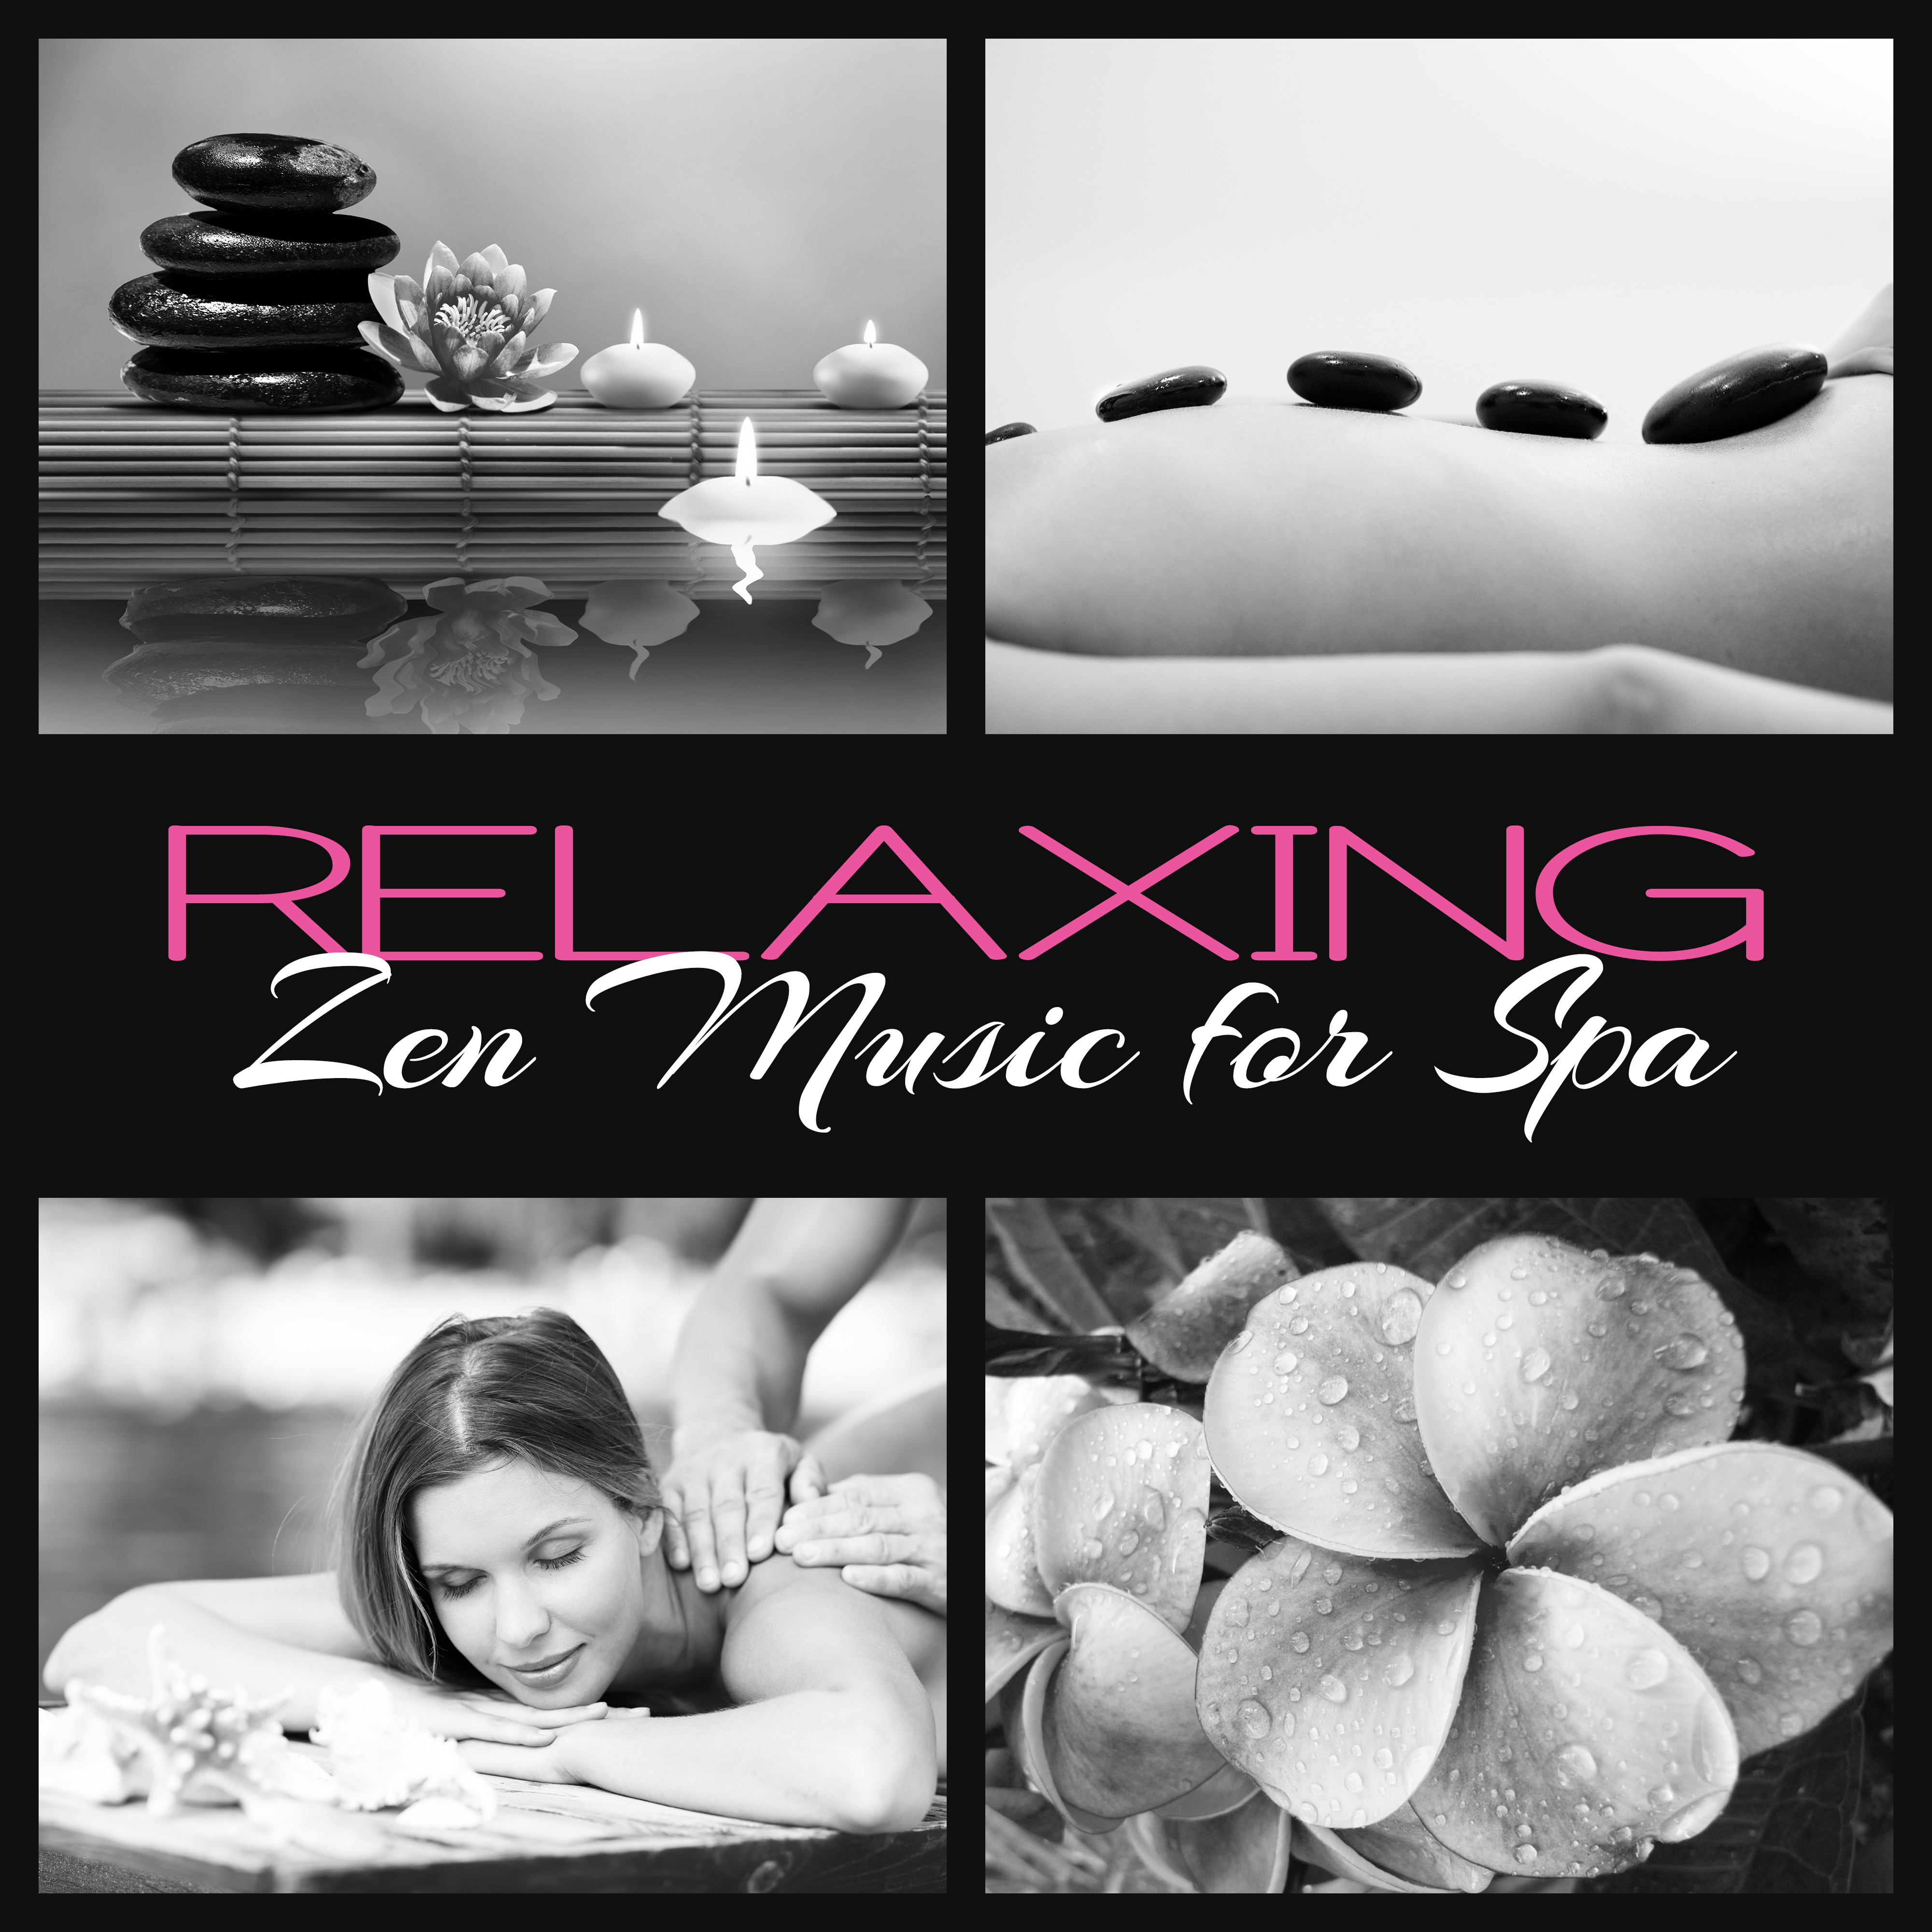 Relaxing Zen Music for Spa – Calming Music for Massage, Spa, Wellness, Relax, New Age 2017